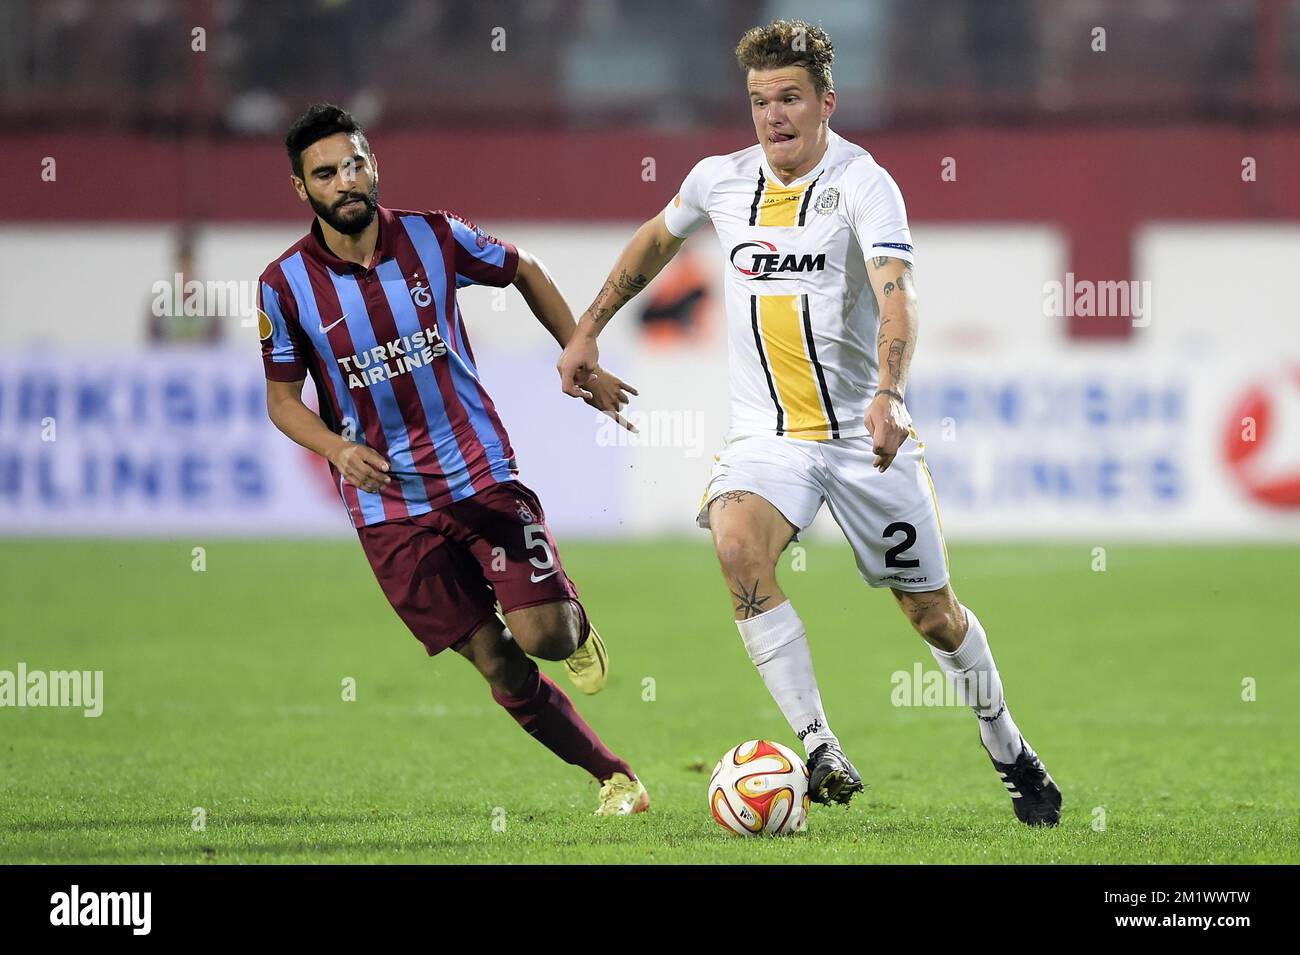 20141023 - TRABZON, TURKEY: Trabzonspor's Mehmet Ekici and Lokeren's Alexander Scholz fight for the ball during a game between Turkish club Trabzonspor AS and Belgian soccer team KSC Lokeren OVL in the Huseyin Avni Aker Stadium in Trabzon, Thursday 23 October 2014. It is the third day of the group stage of the UEFA Europa League competition, in group L. BELGA PHOTO YORICK JANSENS Stock Photo